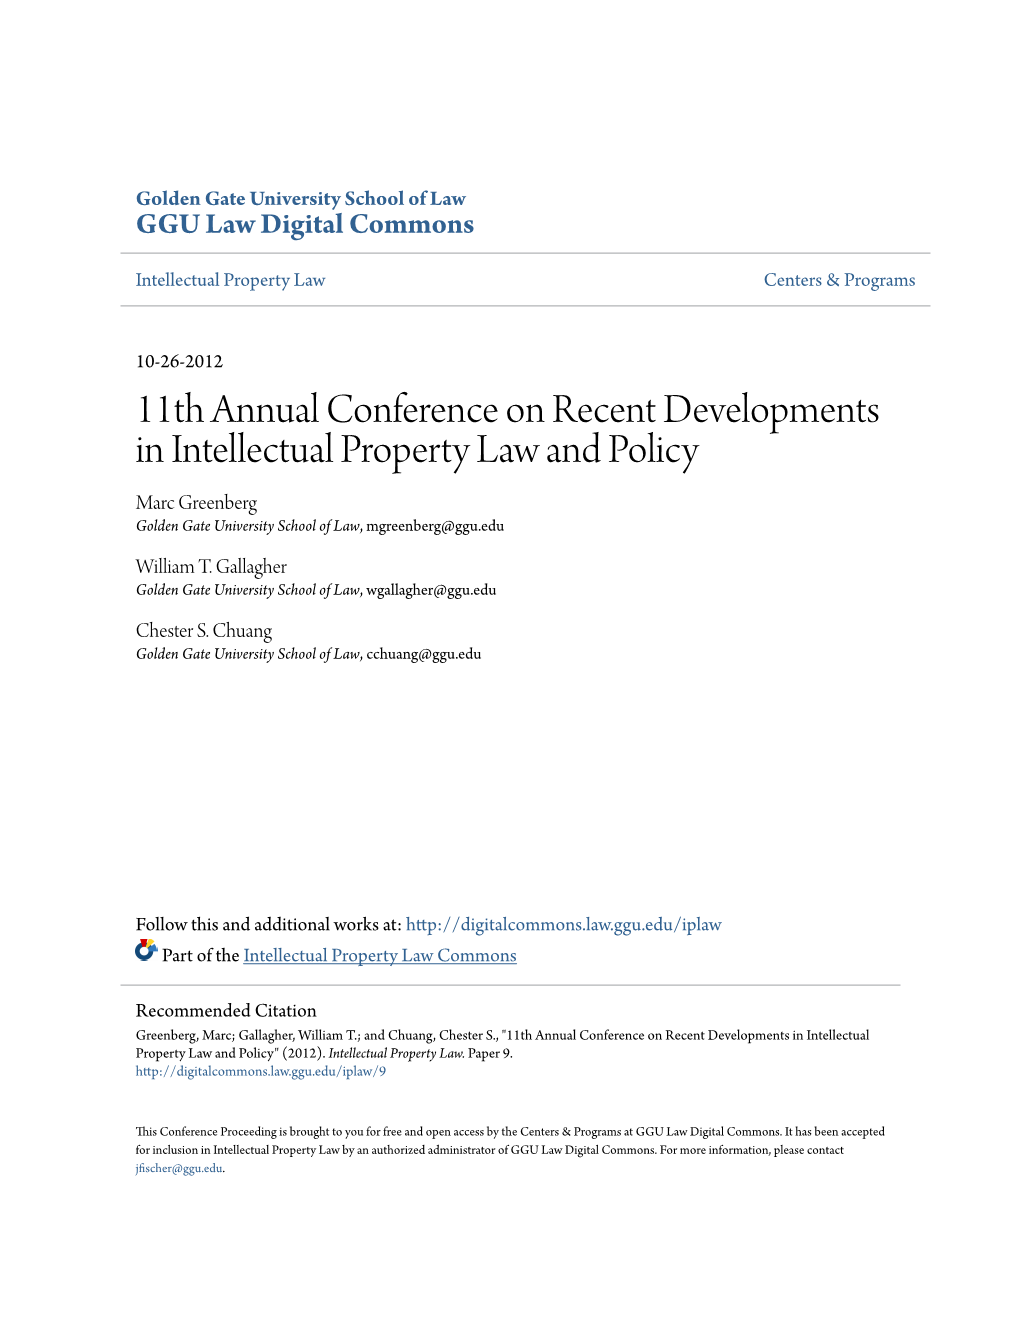 11Th Annual Conference on Recent Developments in Intellectual Property Law and Policy Marc Greenberg Golden Gate University School of Law, Mgreenberg@Ggu.Edu